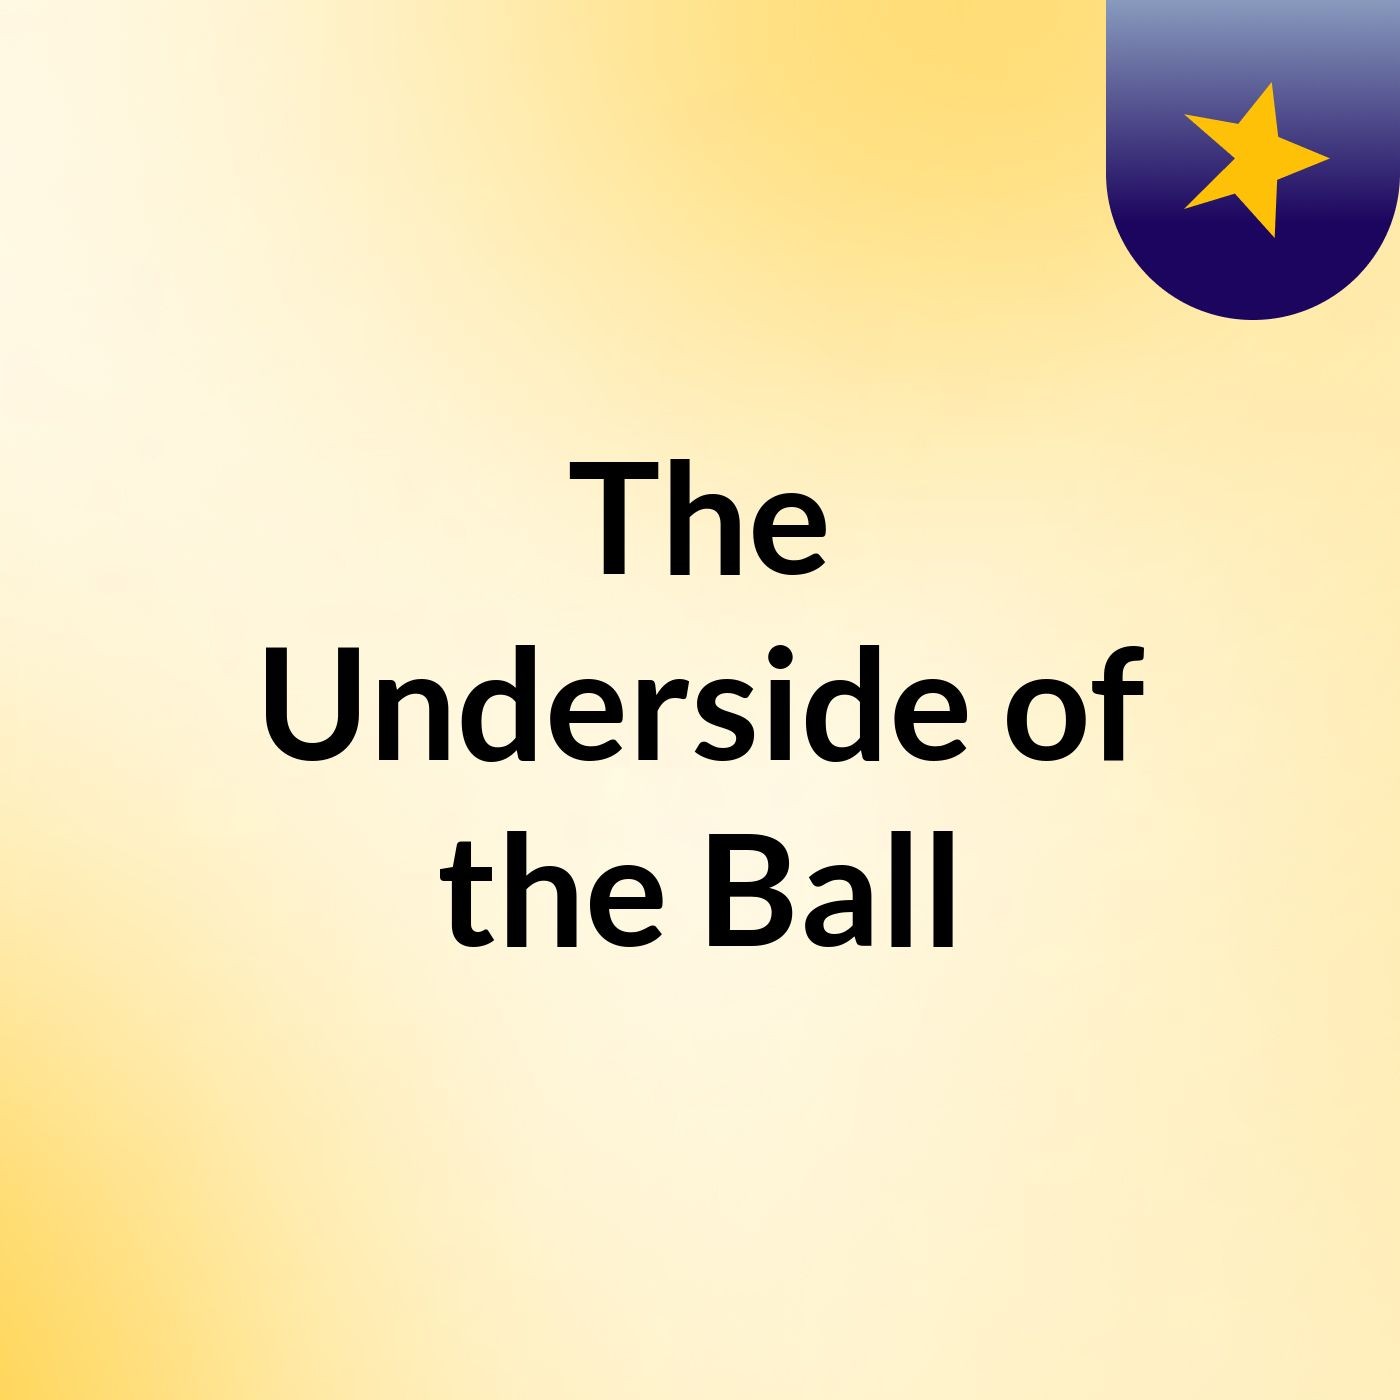 The under side of the ball